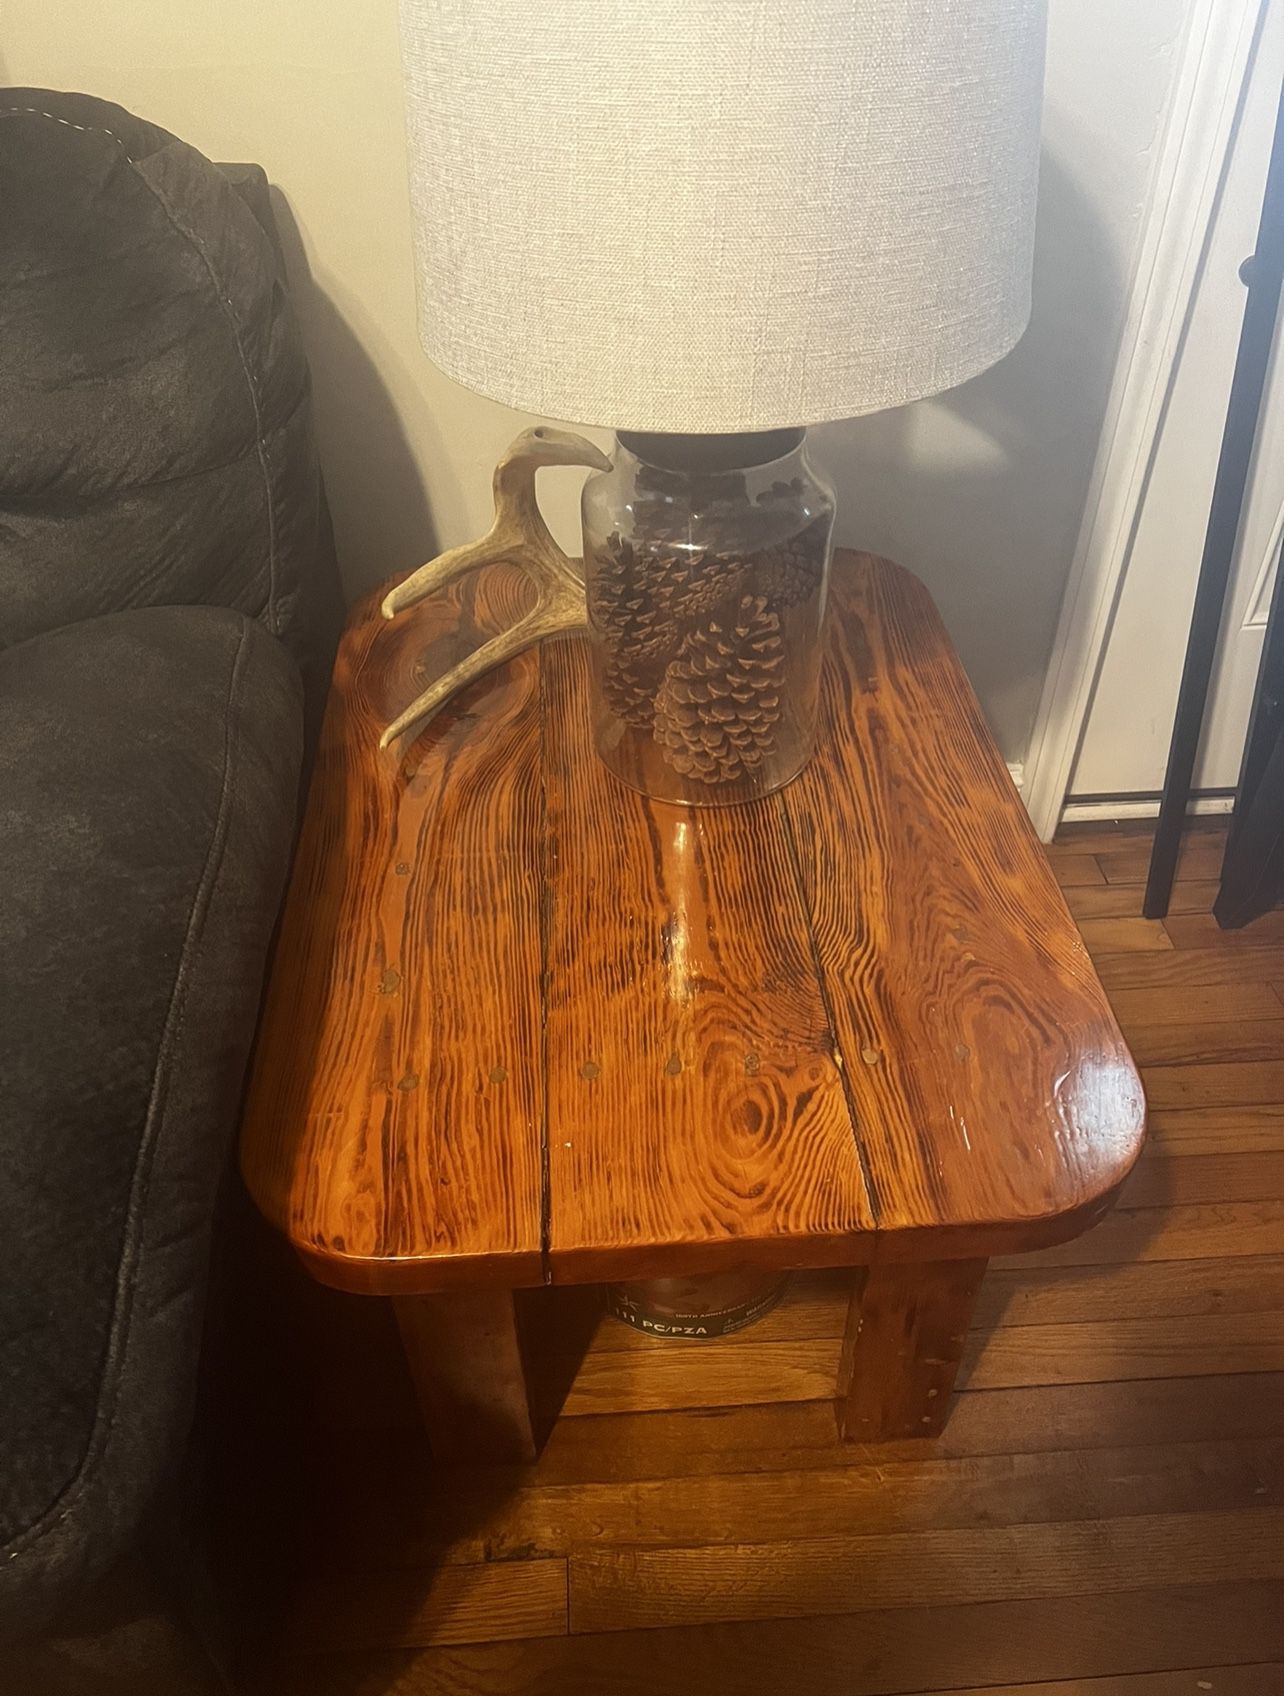 2 Solid Wood end tables